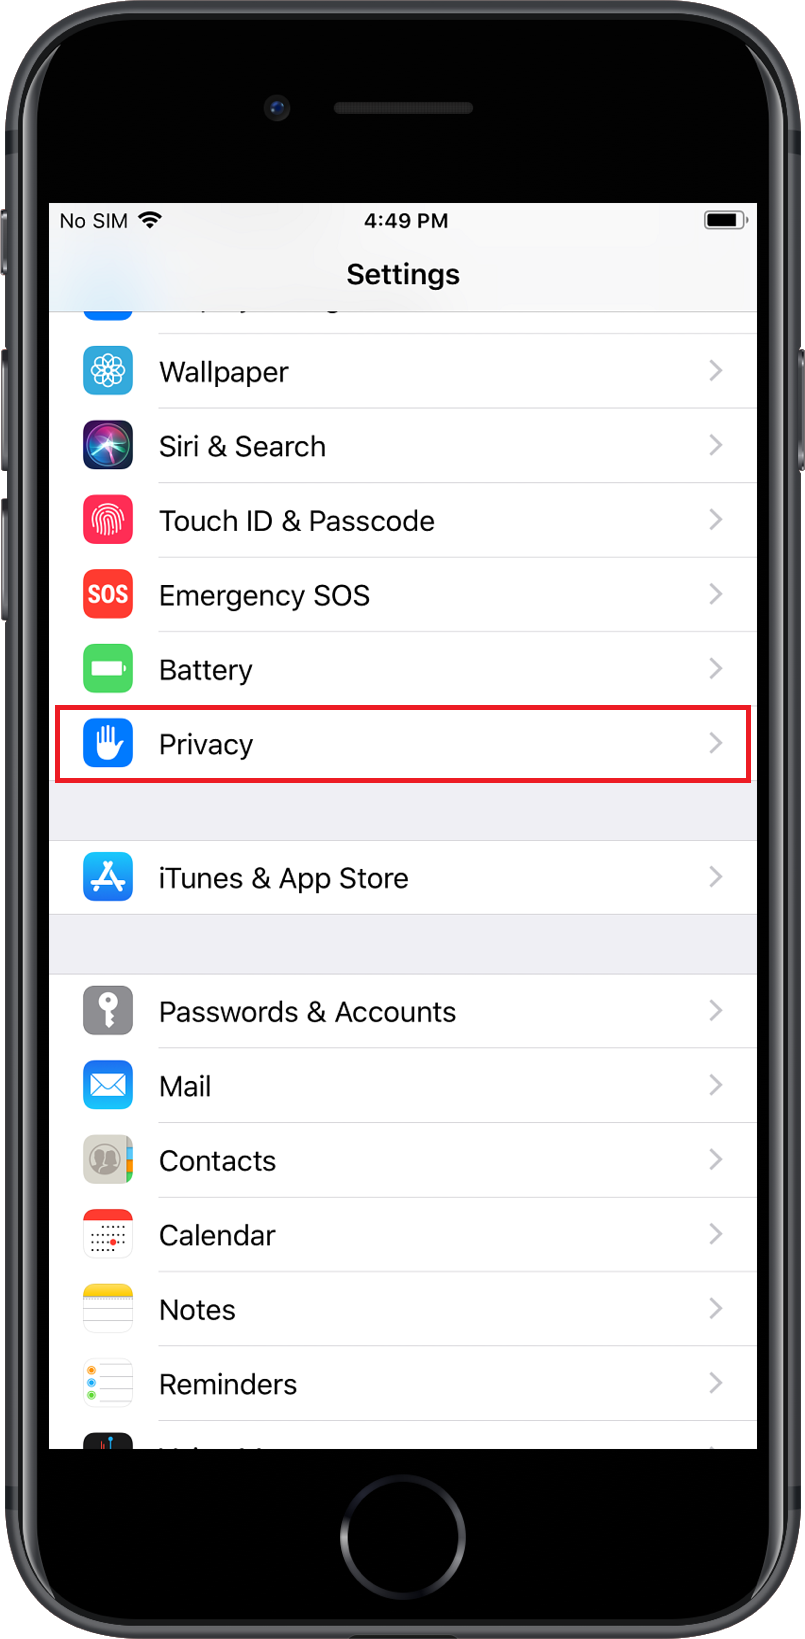 Enabling Location Services for Geotracking on iOS devices